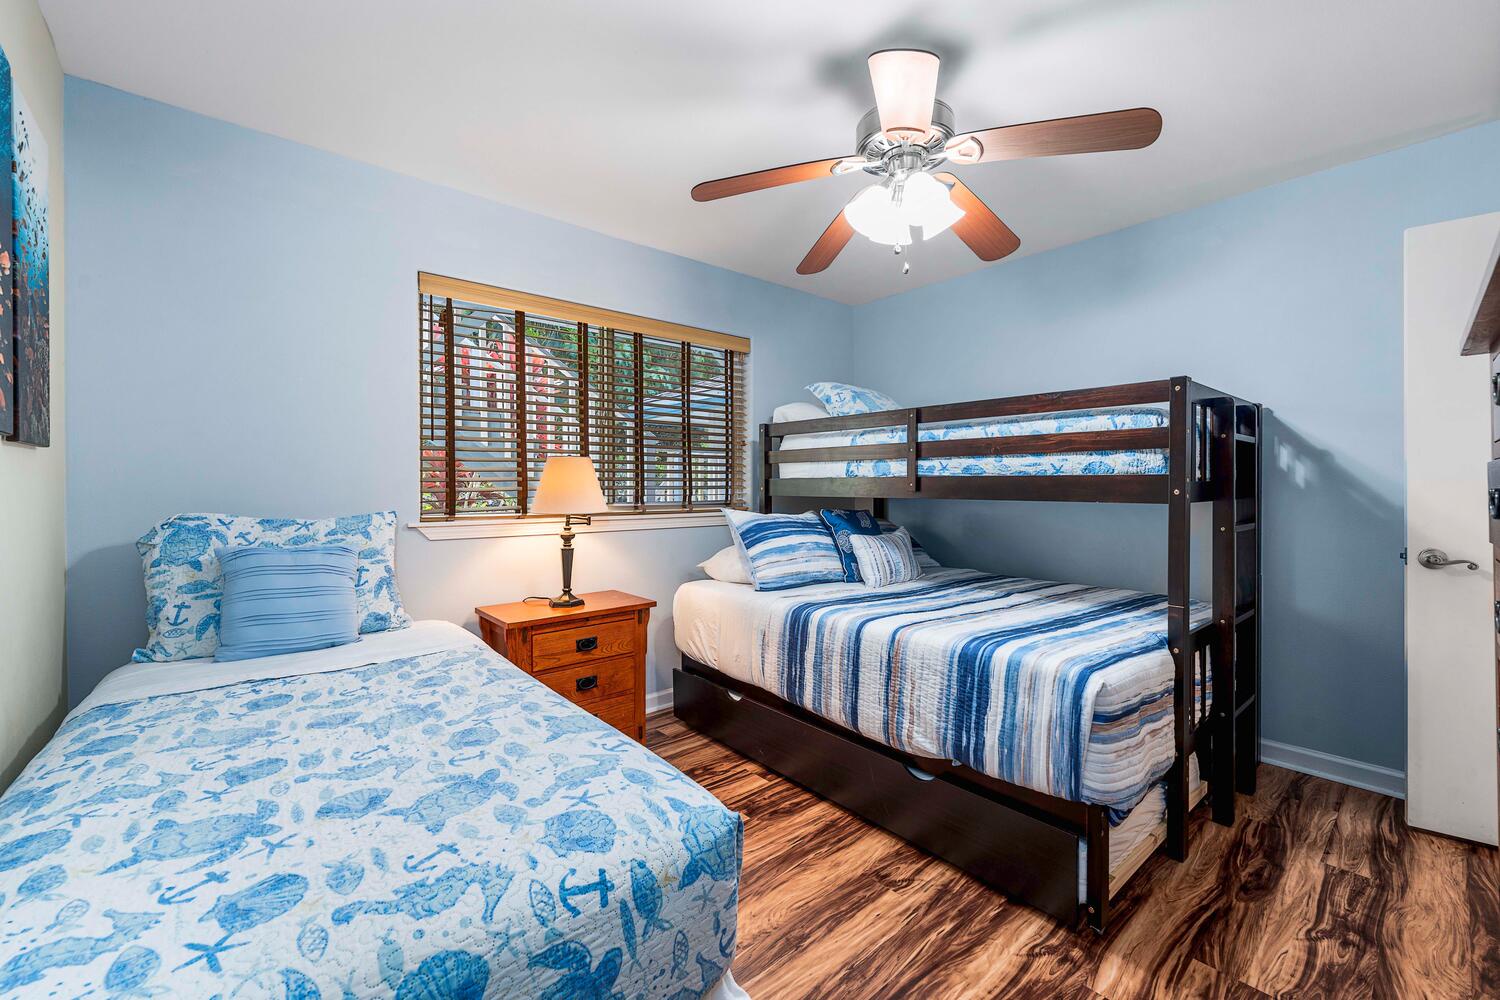 Kailua Kona Vacation Rentals, Honu O Kai (Turtle of the Sea) - Guest Bedroom three with a twin and a bunk bed at ground level, the perfect room for the little ones.